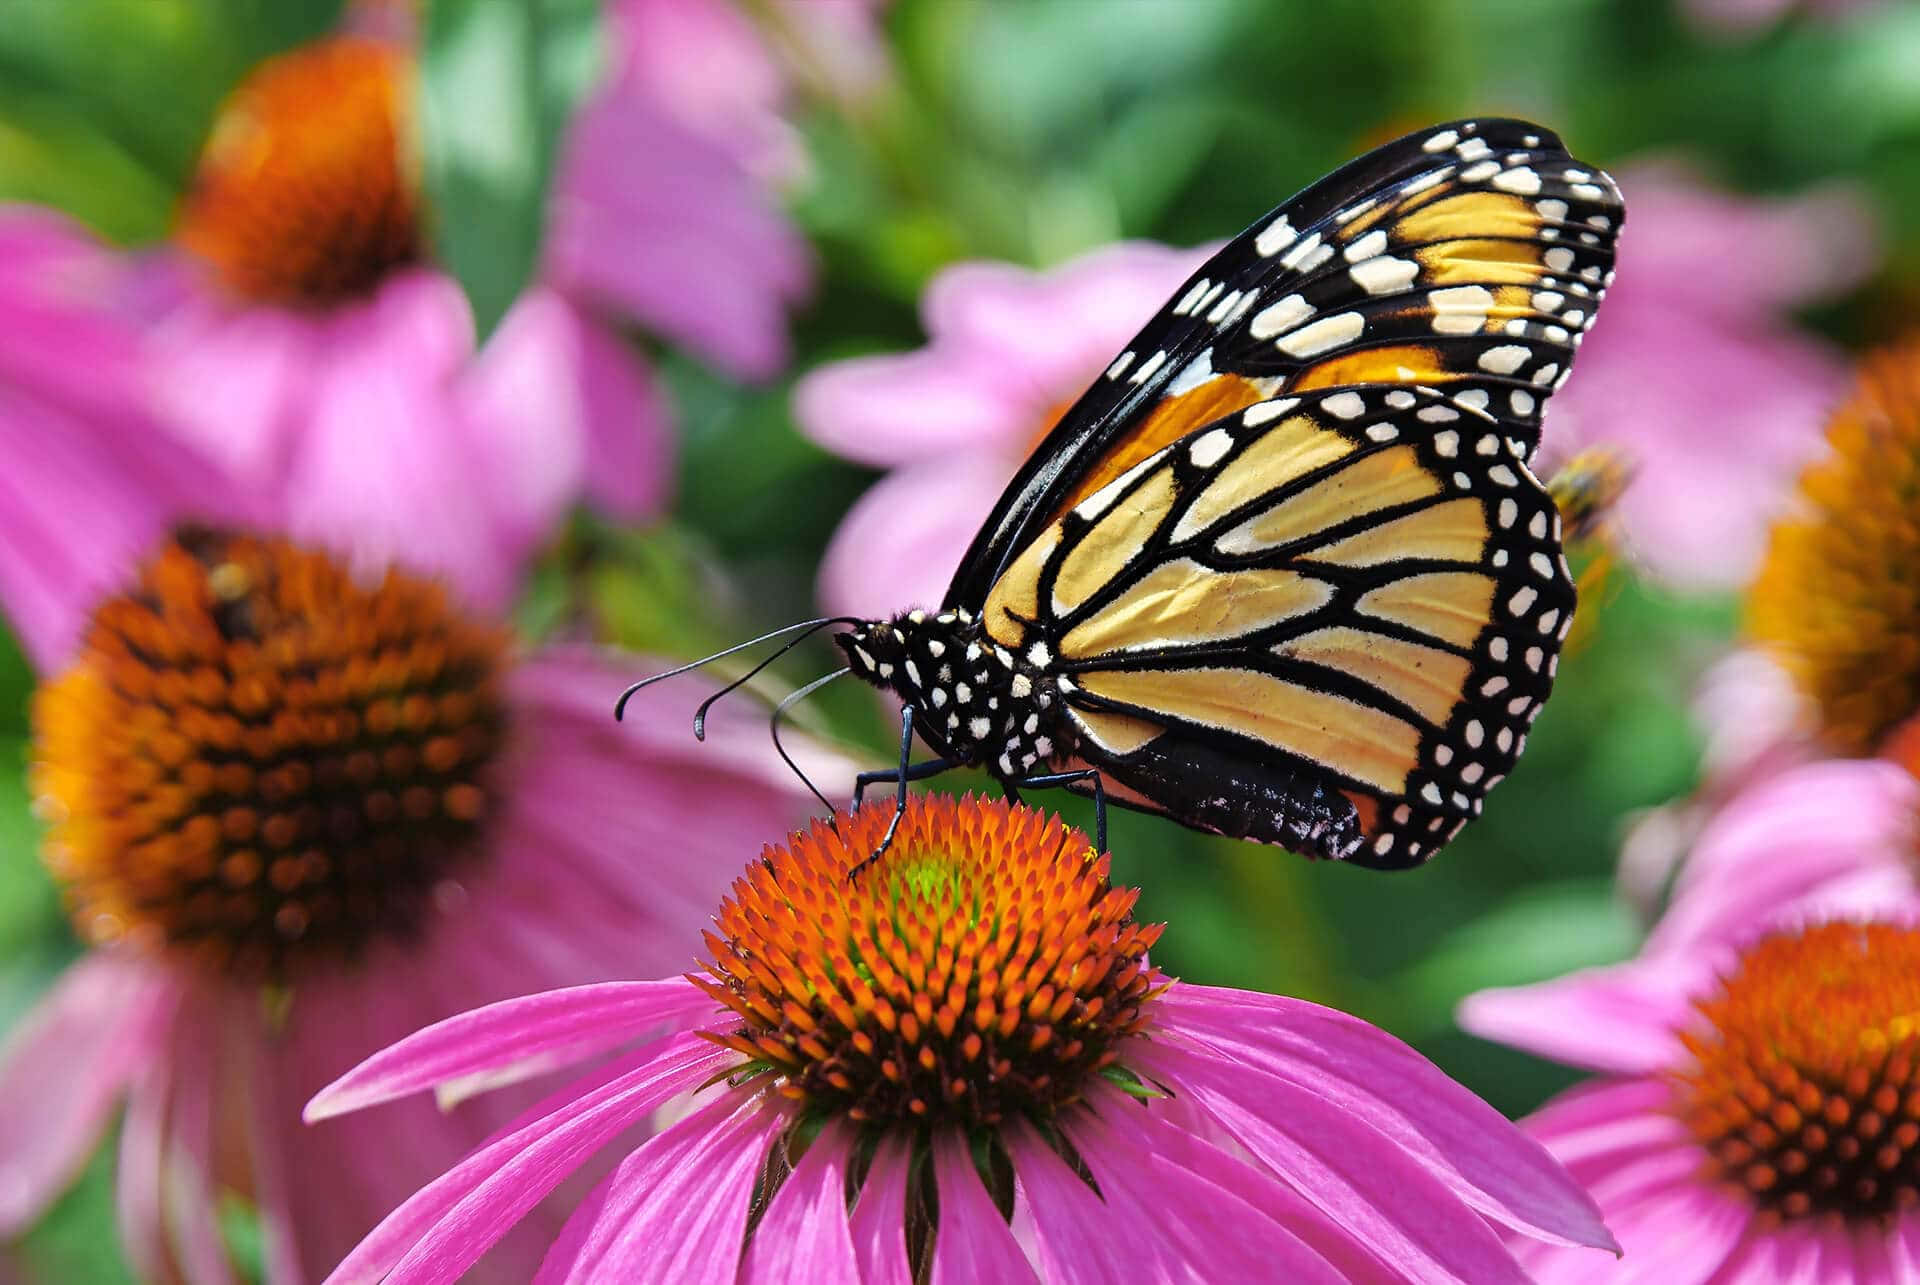 Transform your outdoor space into a dazzling butterfly garden! Wallpaper